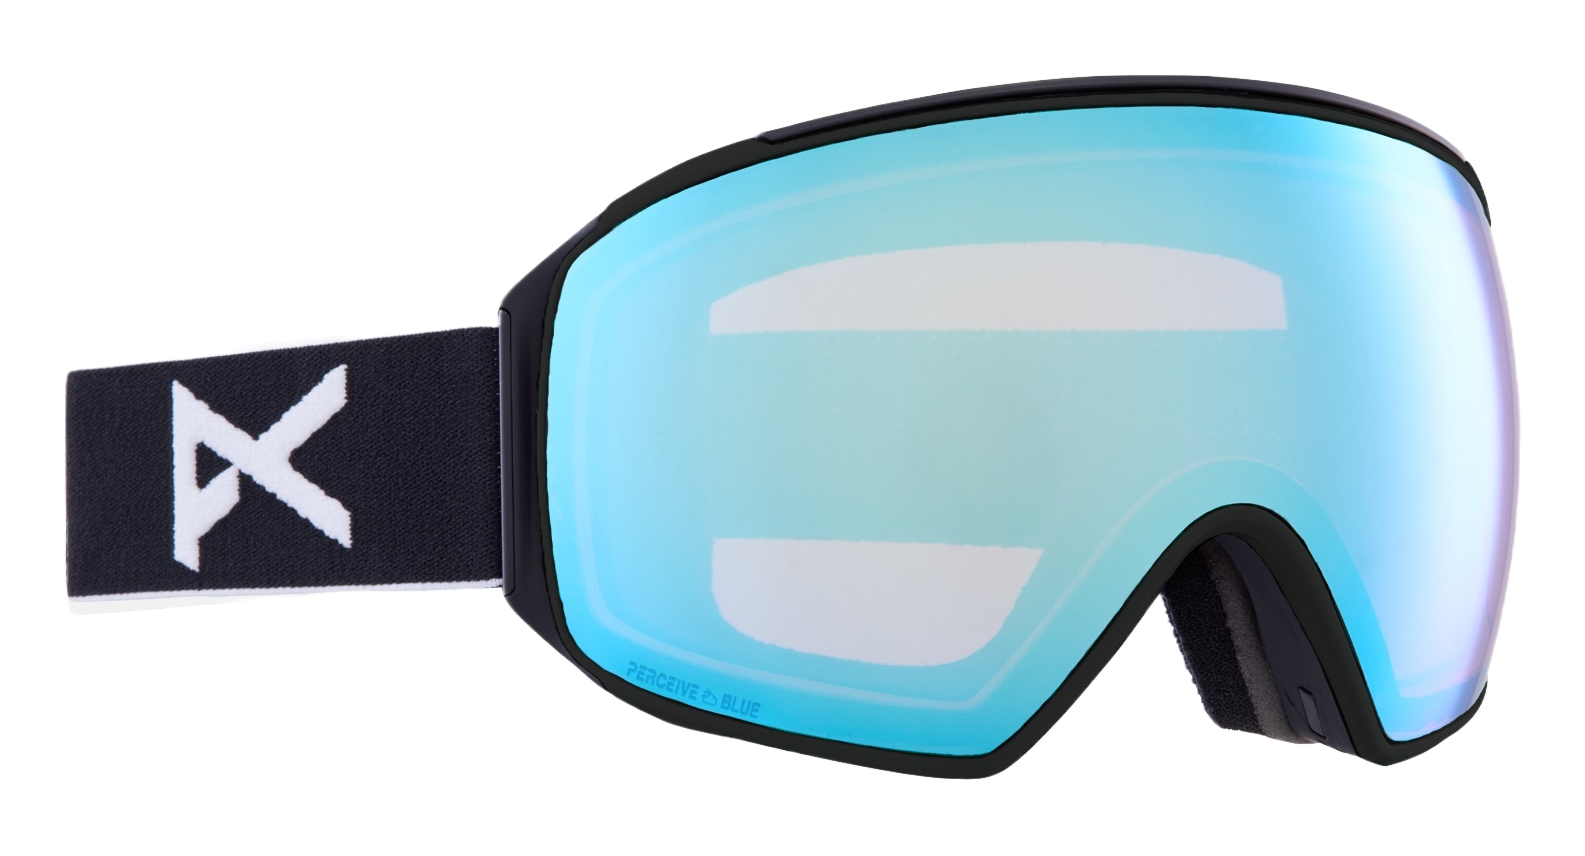 ANON M4 Toric goggles - Black w/ Perceive Variable Blue